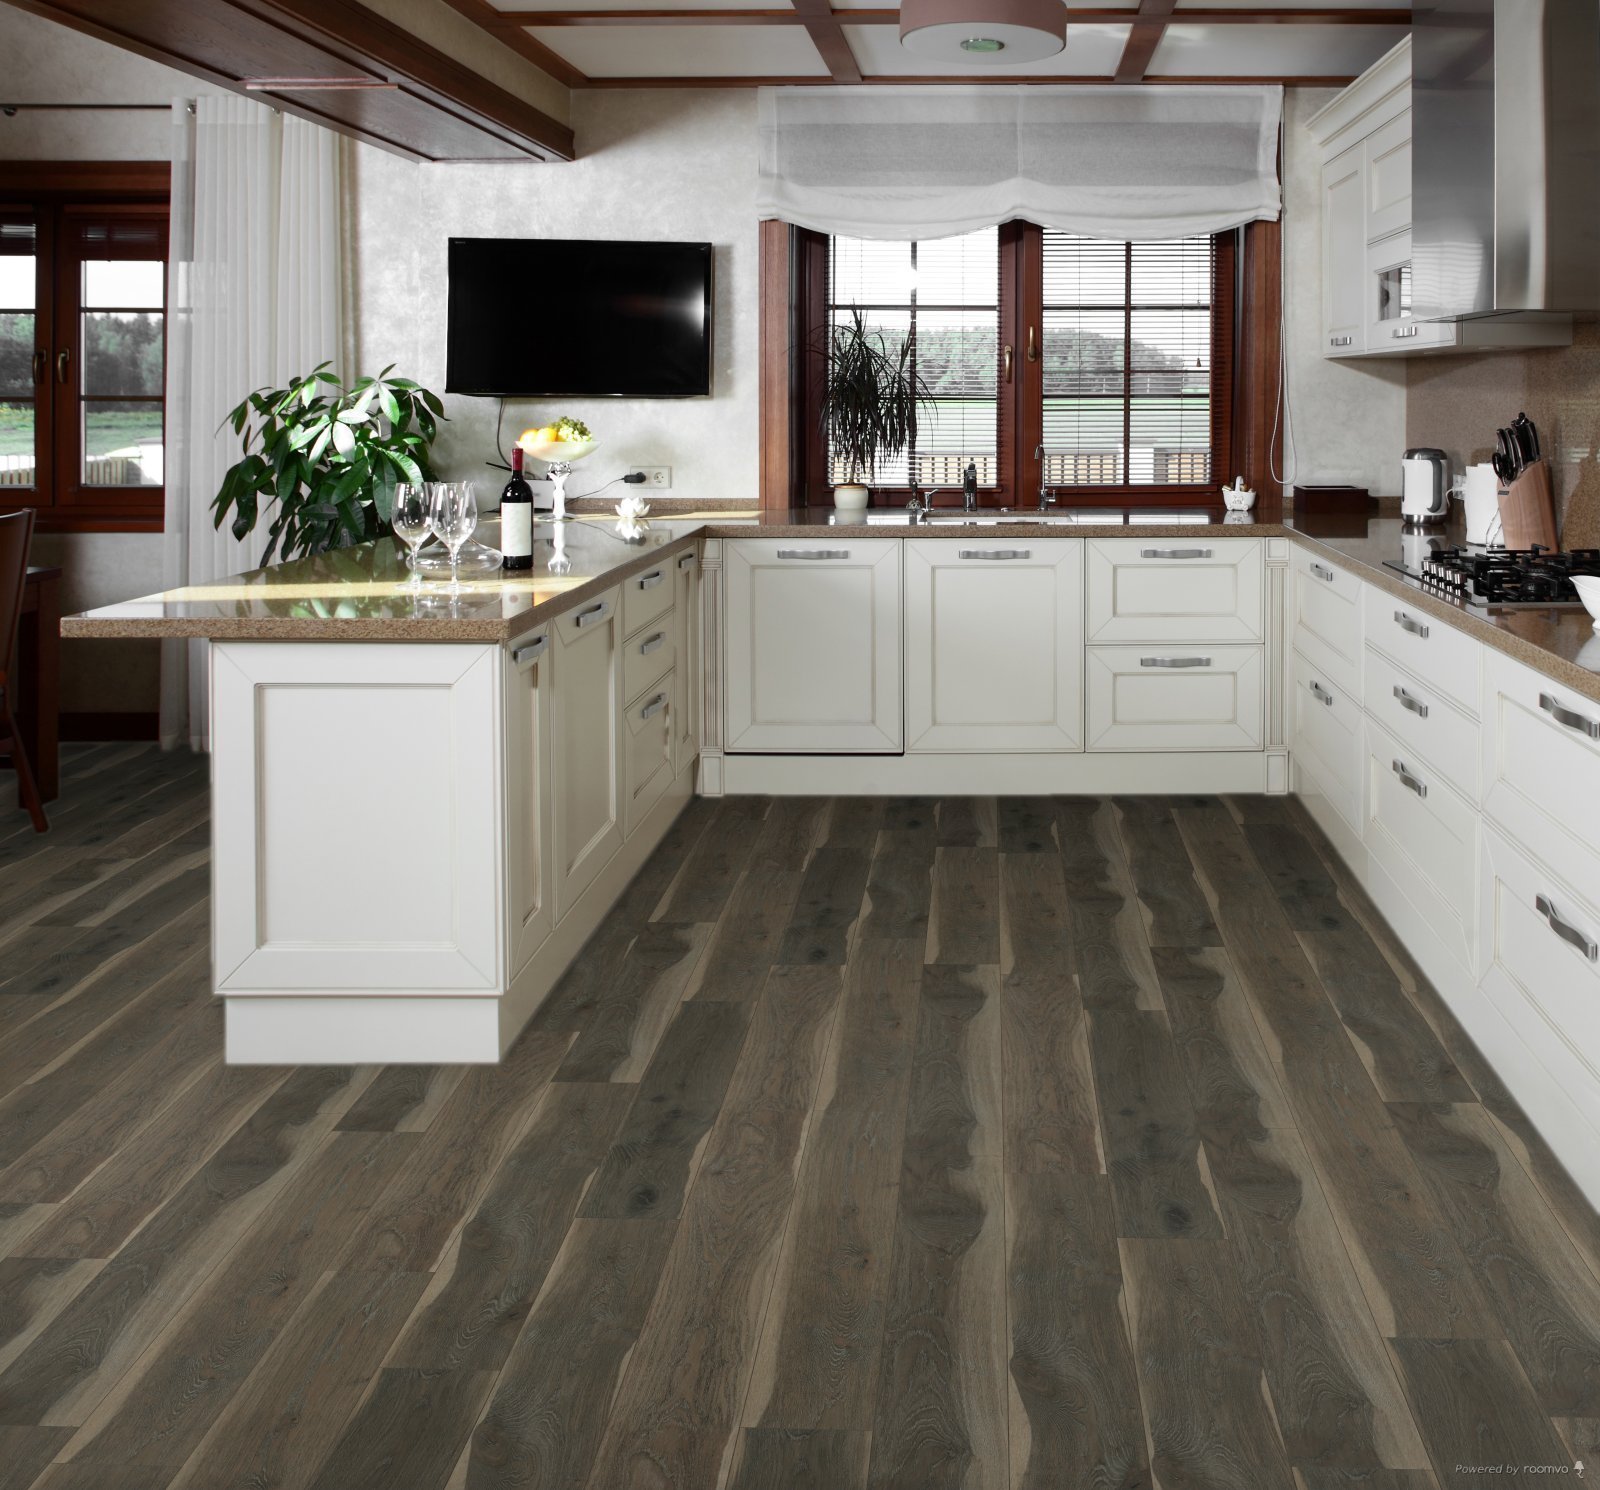 Horizen Flooring presents to you a picture of a quality wide plank Clater Lake luxury vinyl plank. NovoCore Premium collection features a wide range of colors & designs that will compliment any interior. Natural wood grain synchronized surface allow for an authentic hardwood look & feel. This collection features a 0.25″ / 6.5 mm overall thickness and a durable 22 mil / 0.55 mm wear layer for residential and commercial applications.